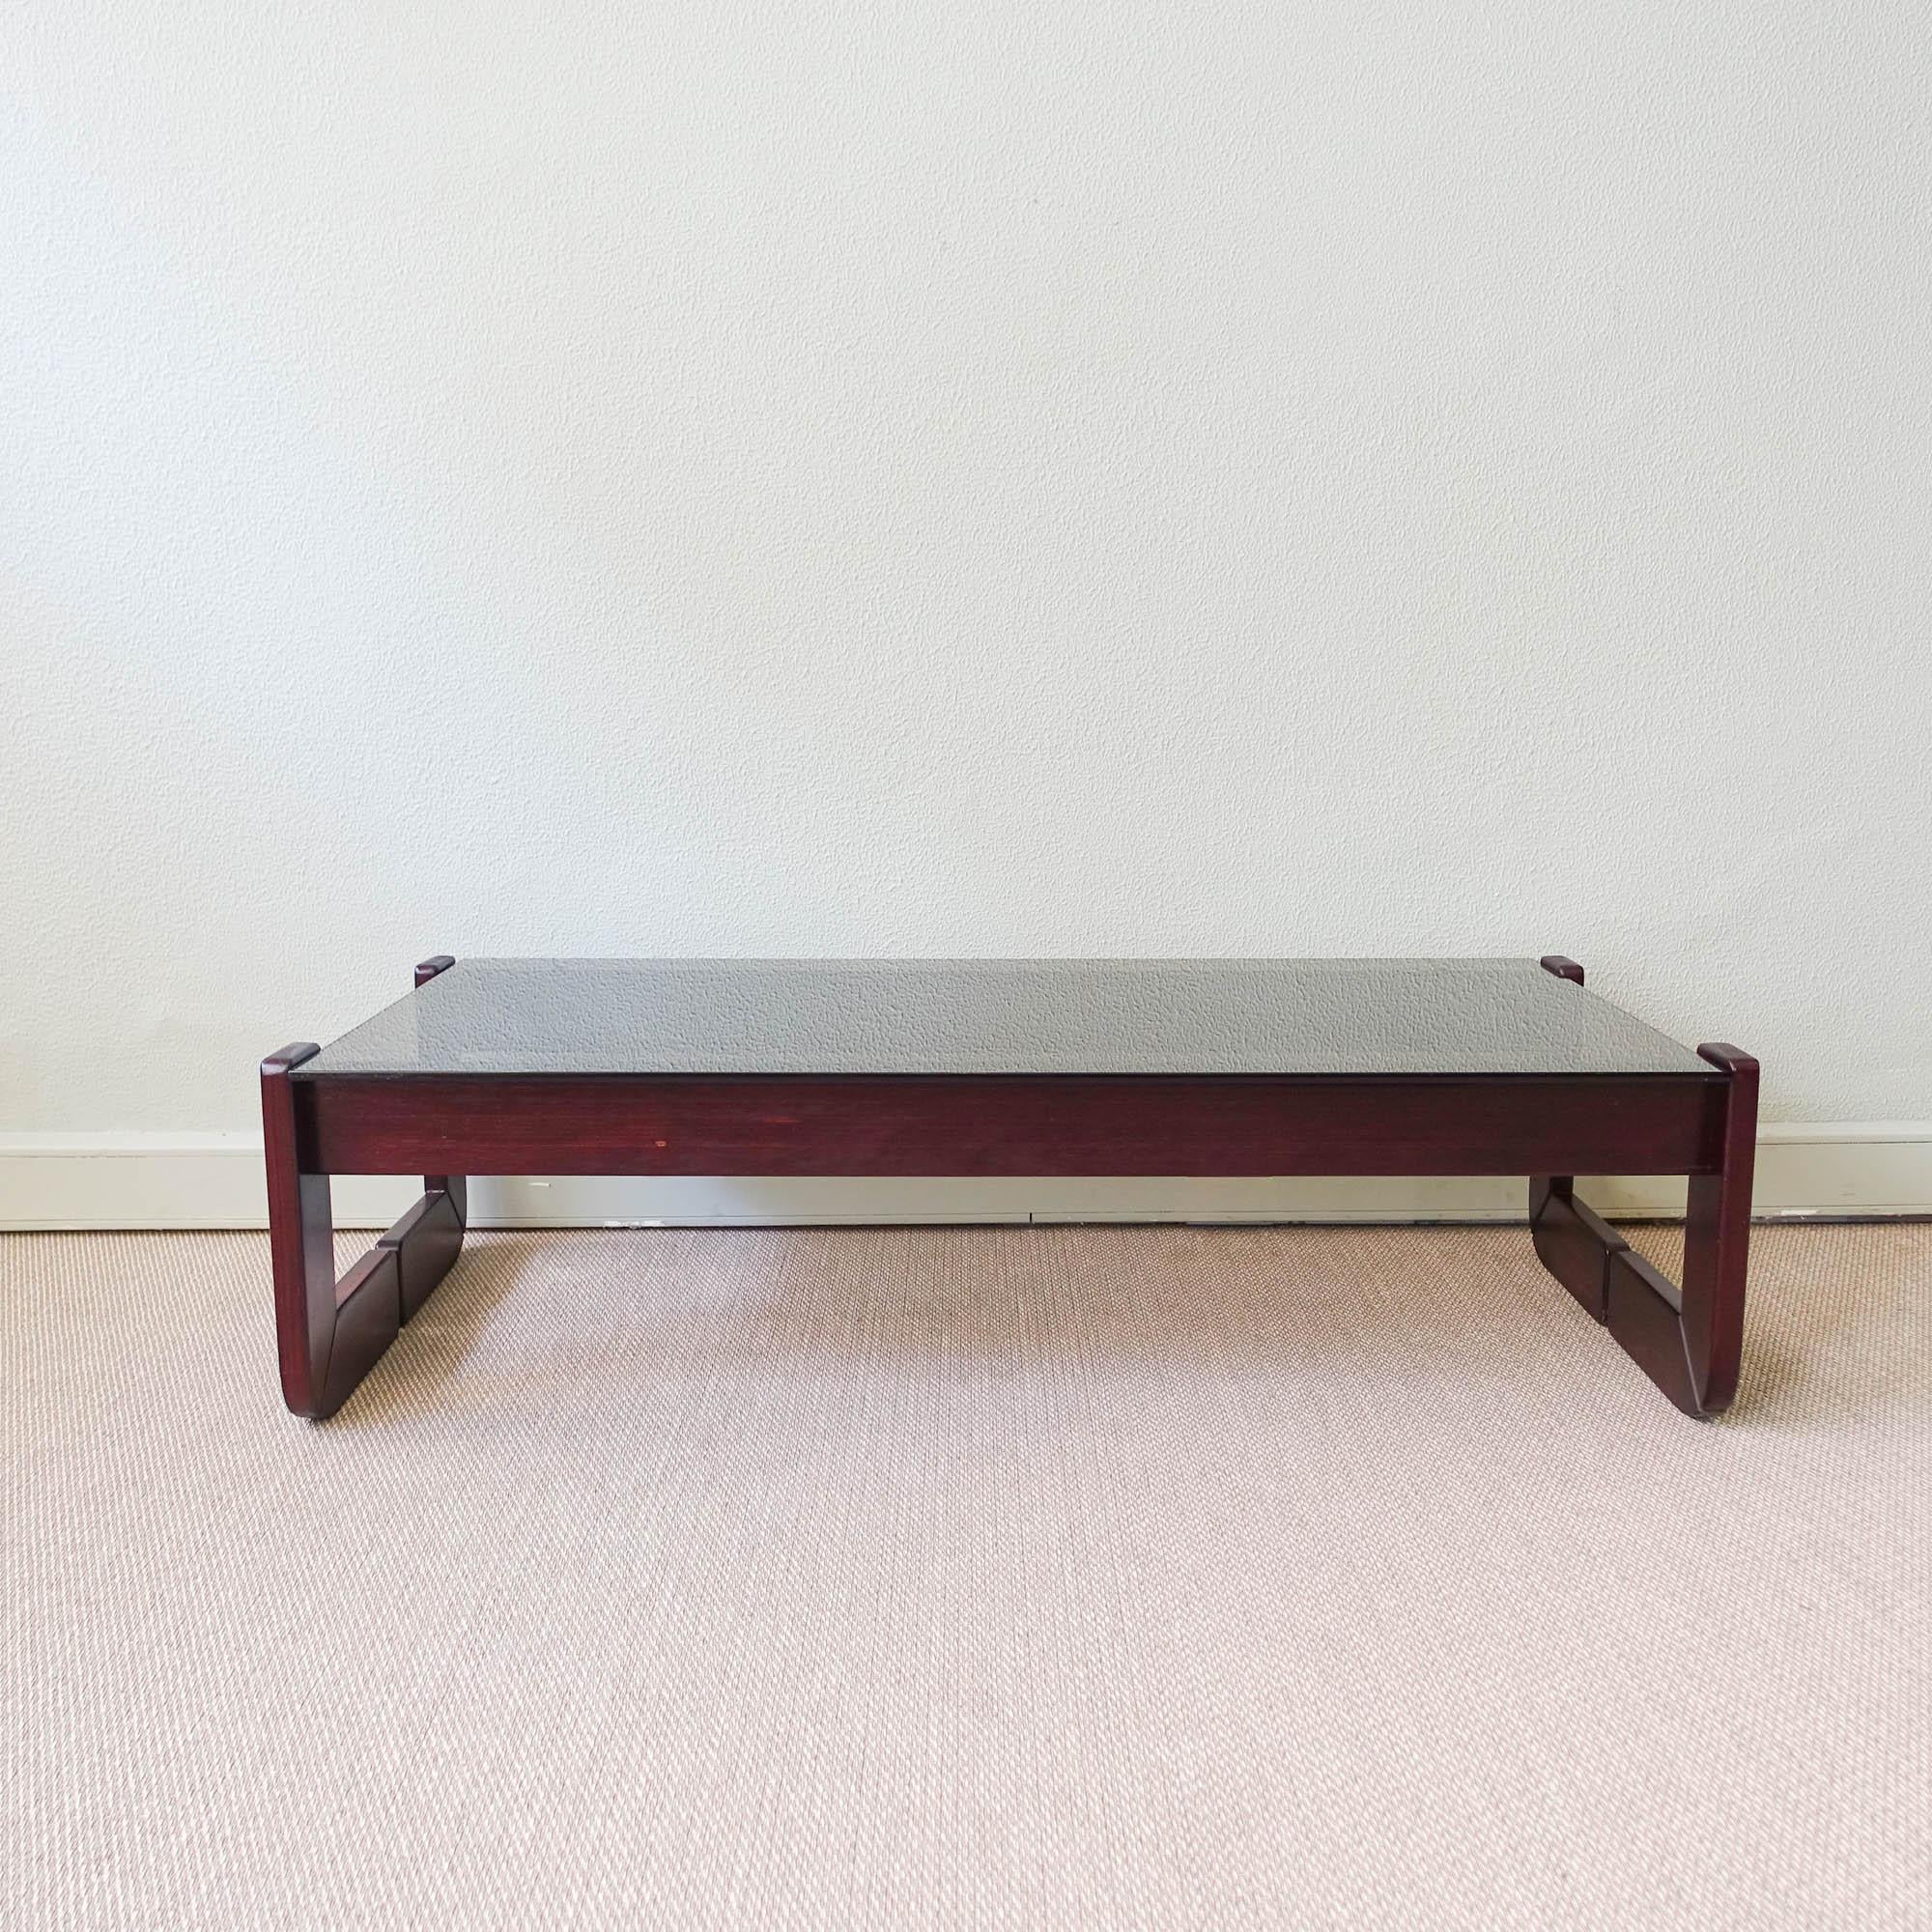 Percival Lafer Exotic Wood and Glass Coffee Table MP 97, 1970's For Sale 2